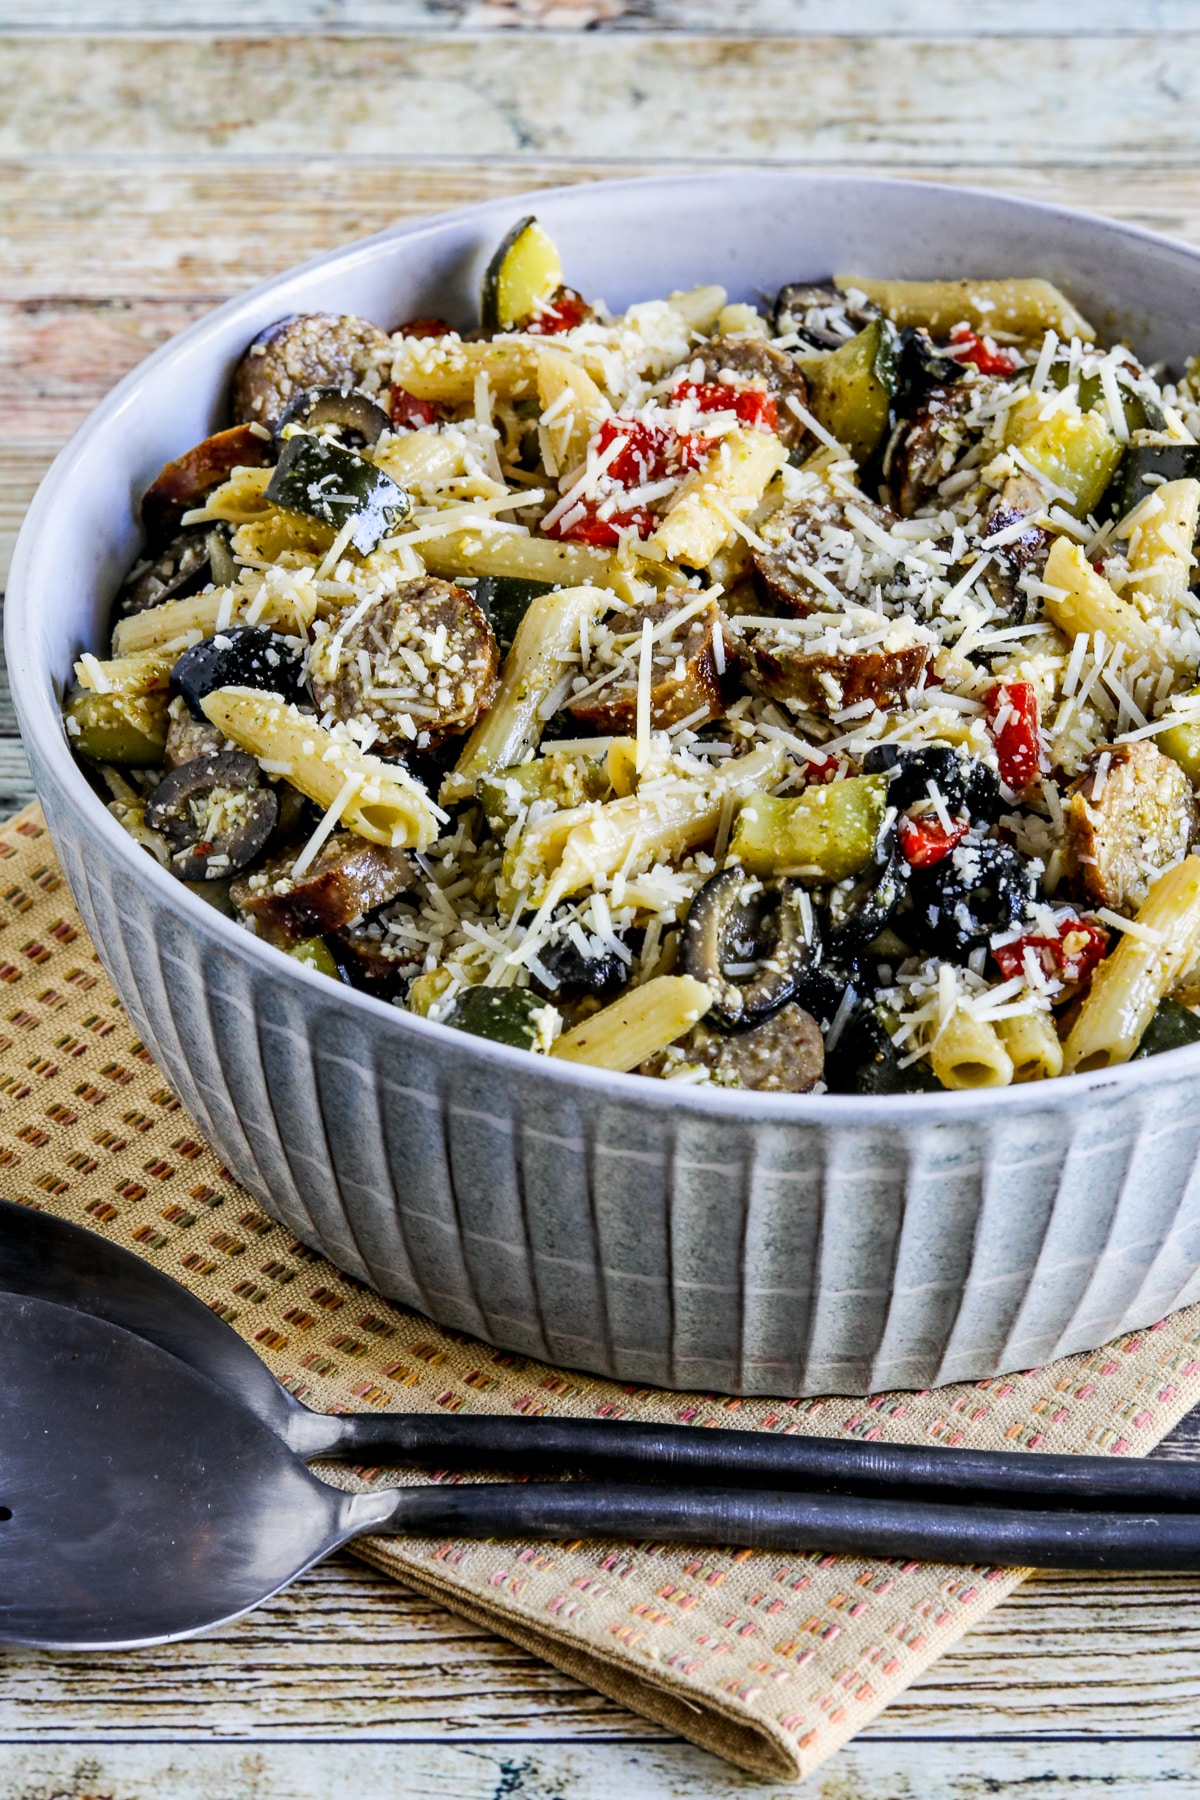 Pasta salad with sausage, zucchini, olives, and peppers as shown in serving bowl on napkin.